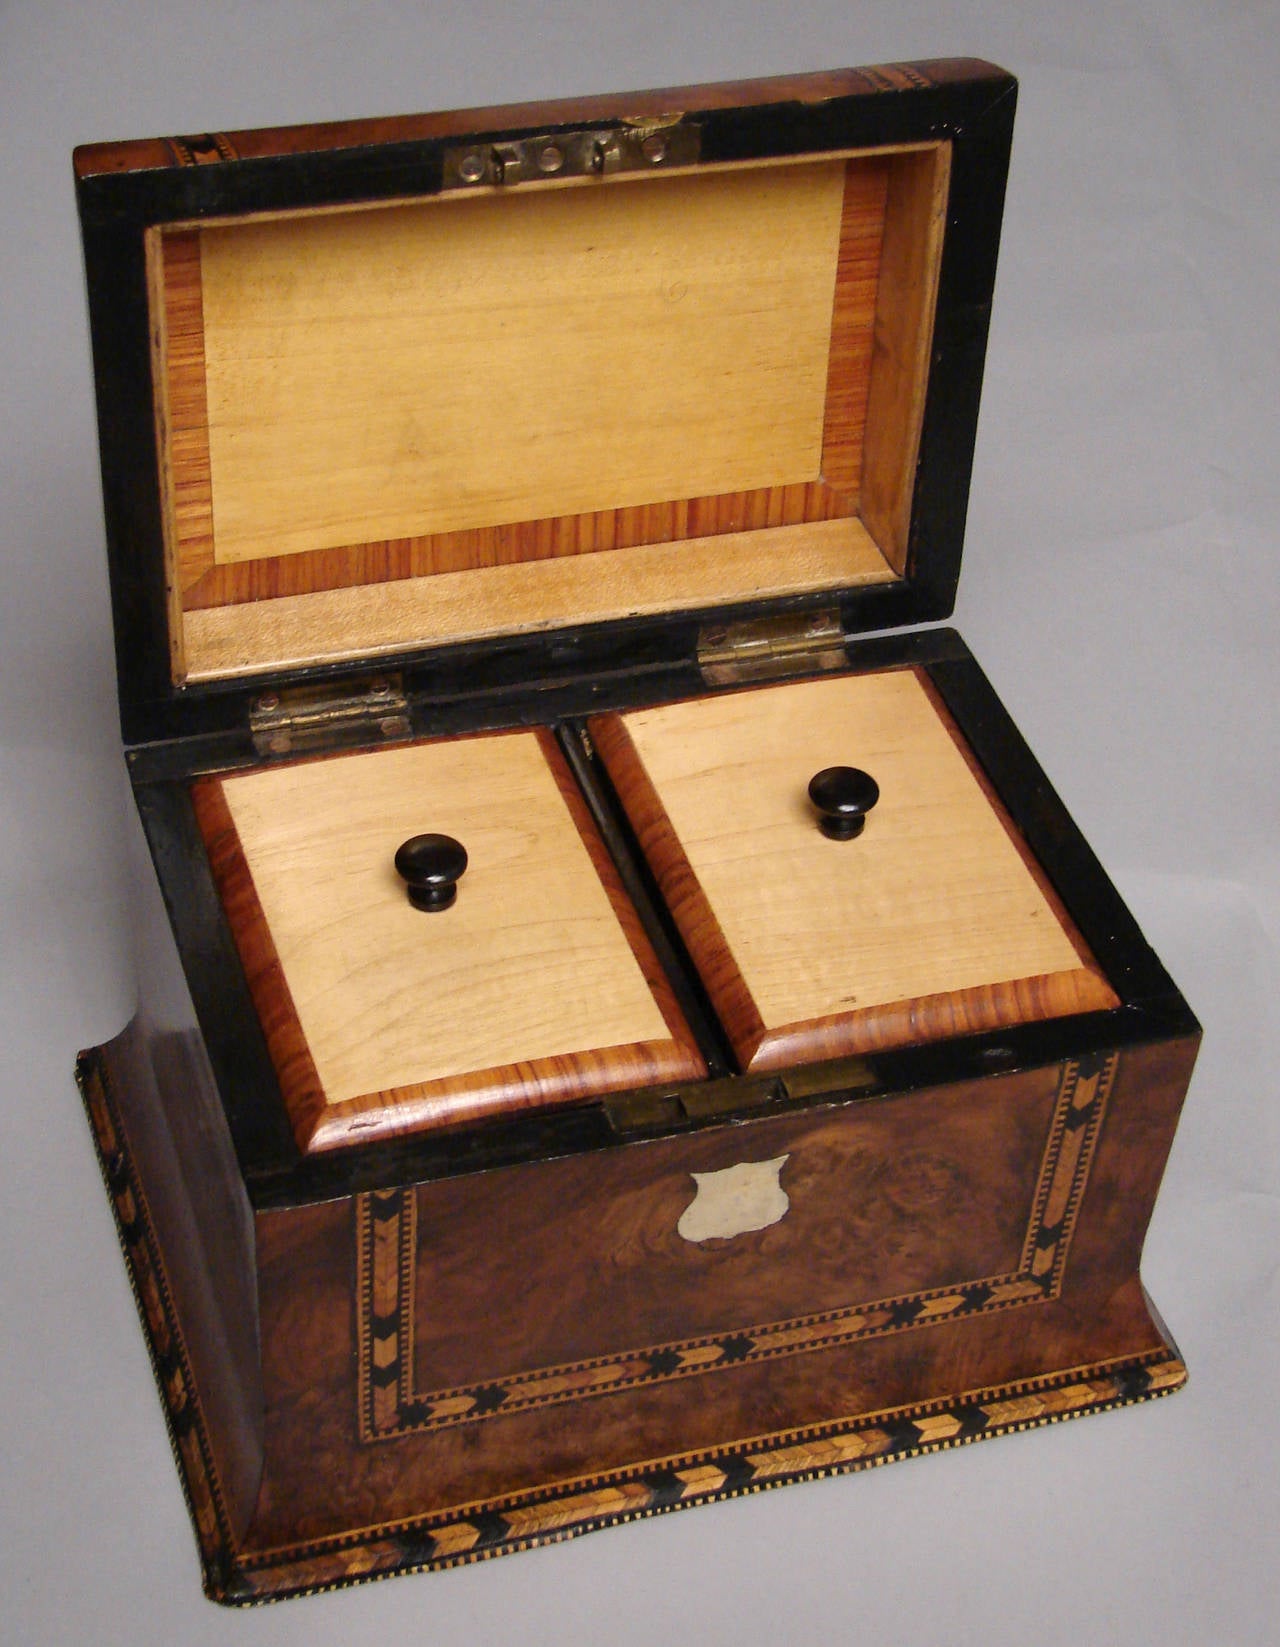 An English Victorian burl walnut tea caddy with mother-of-pearl and mixed wood inlay, circa 1860.